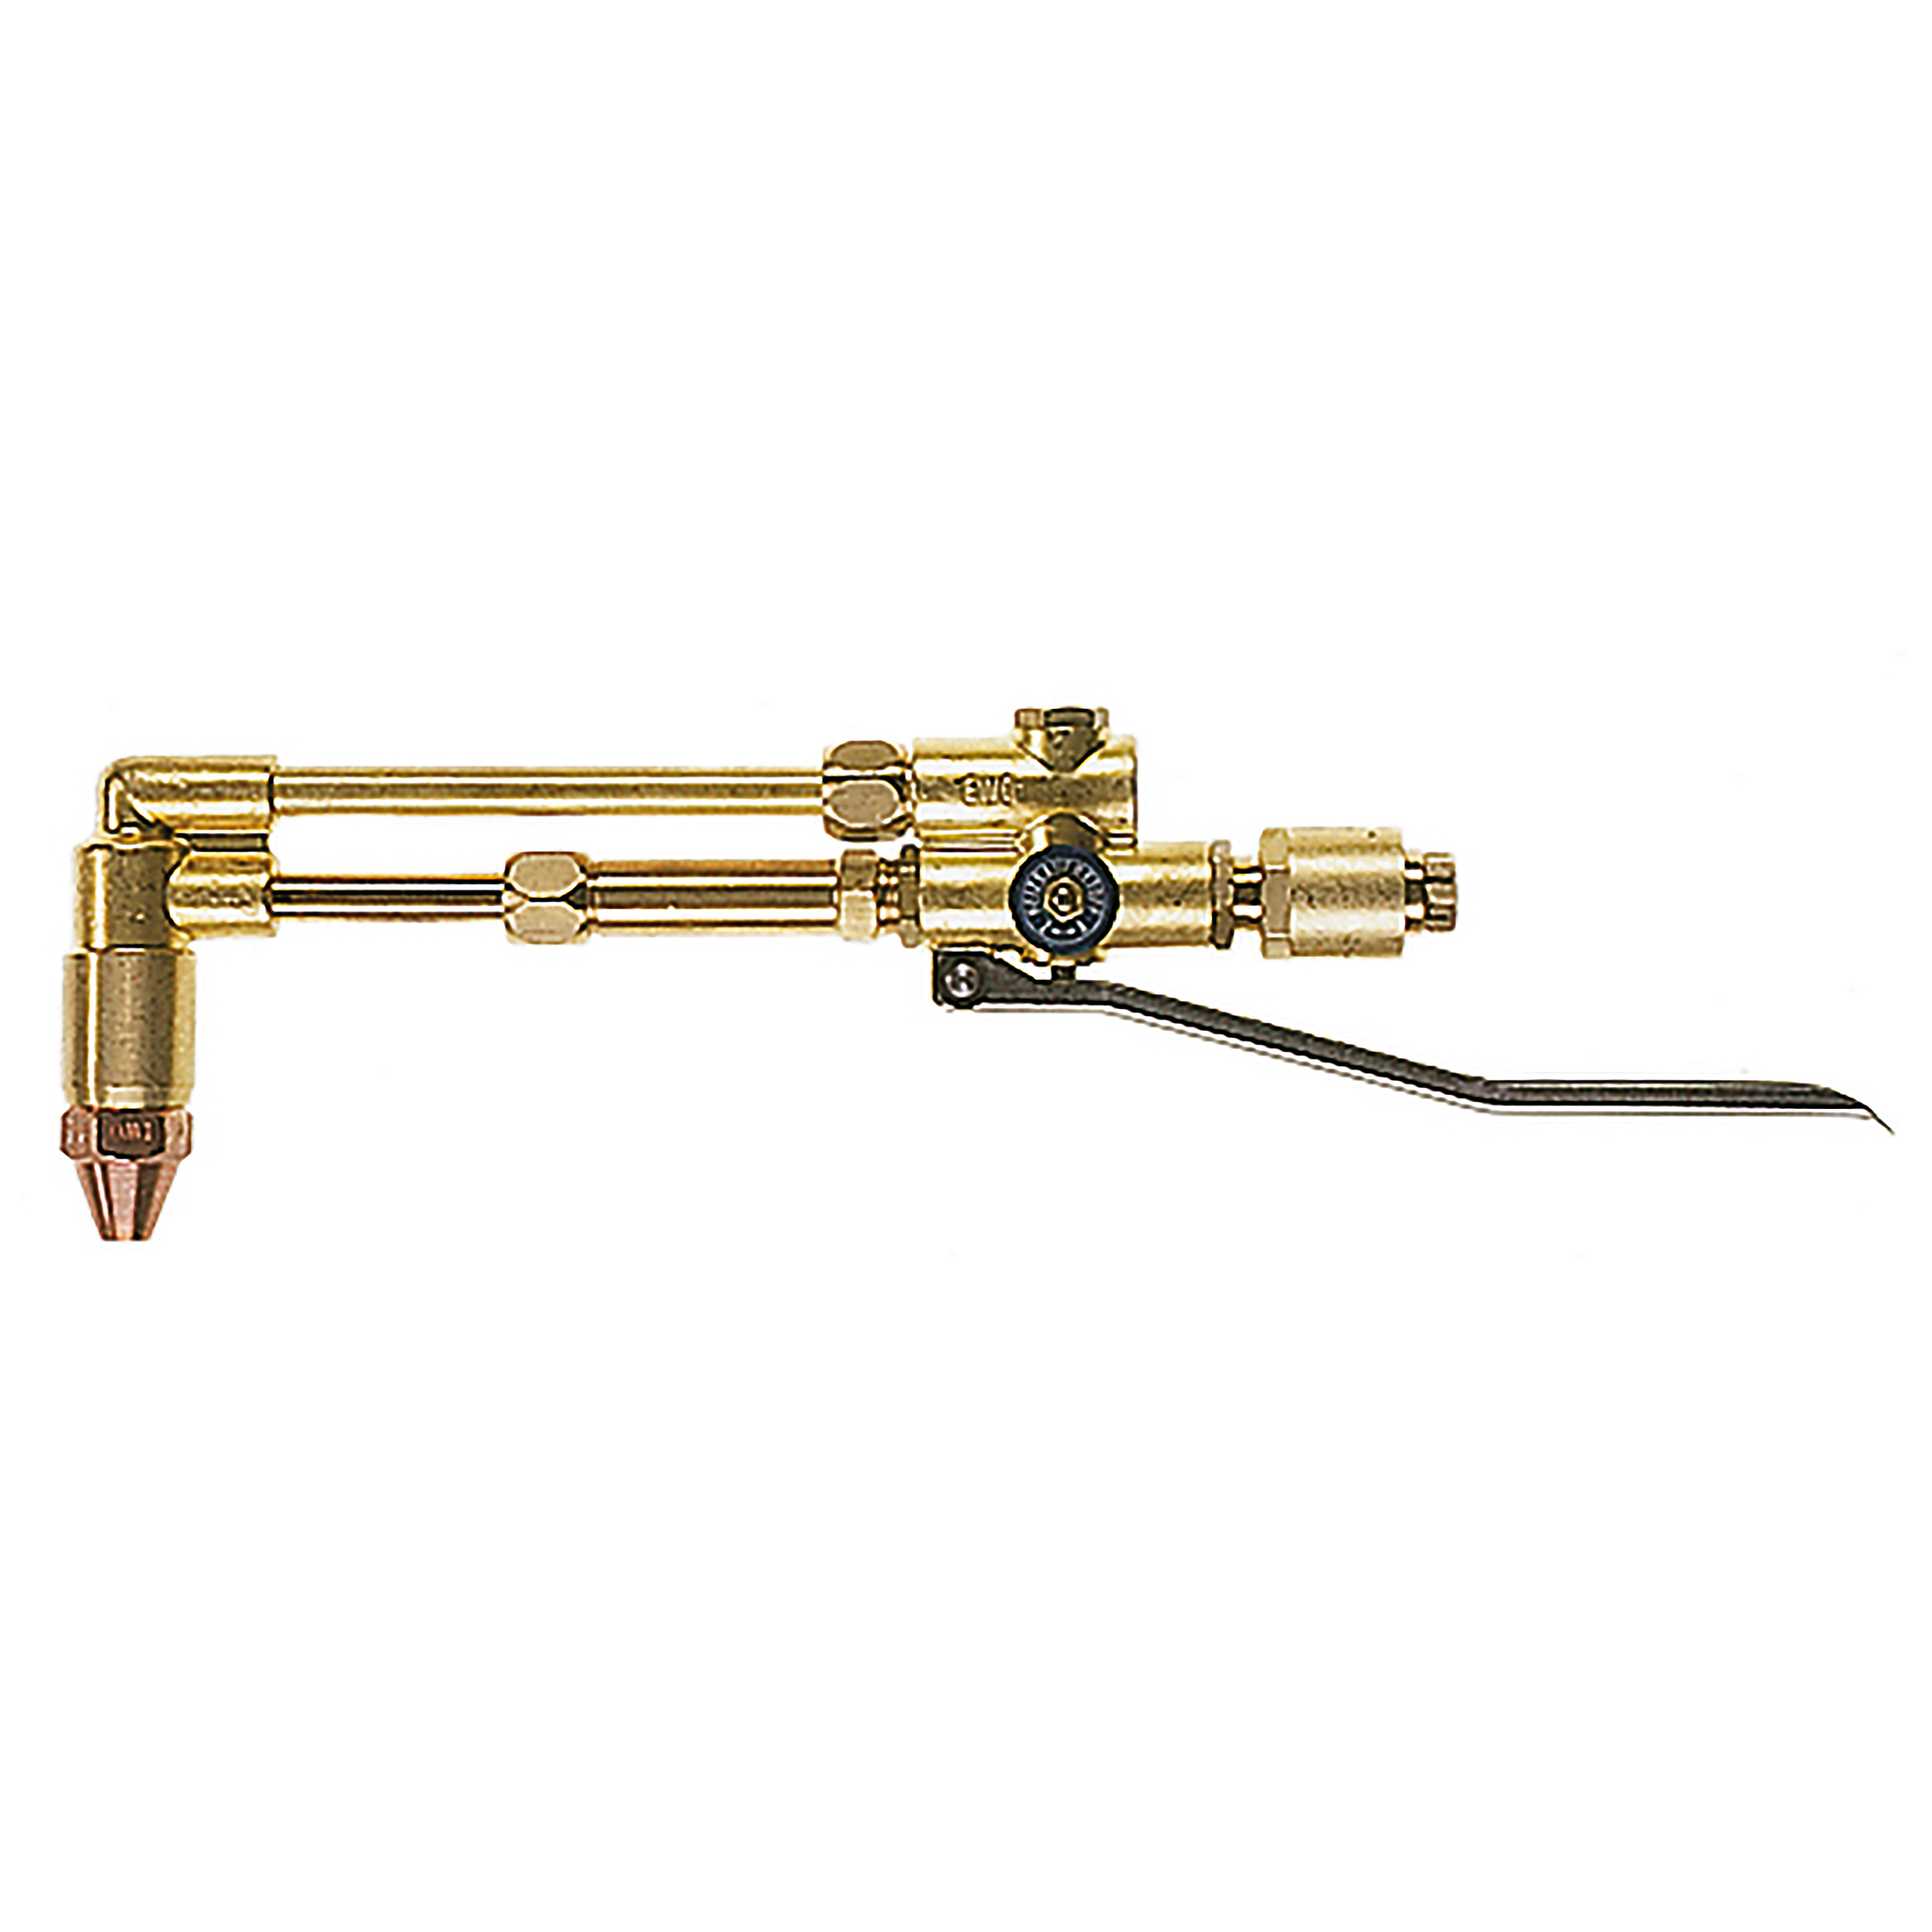 Oxy fuel lever operated cutting head, Ø20 mm, ring nozzle, cutting range: 12–25 mm, without accessories